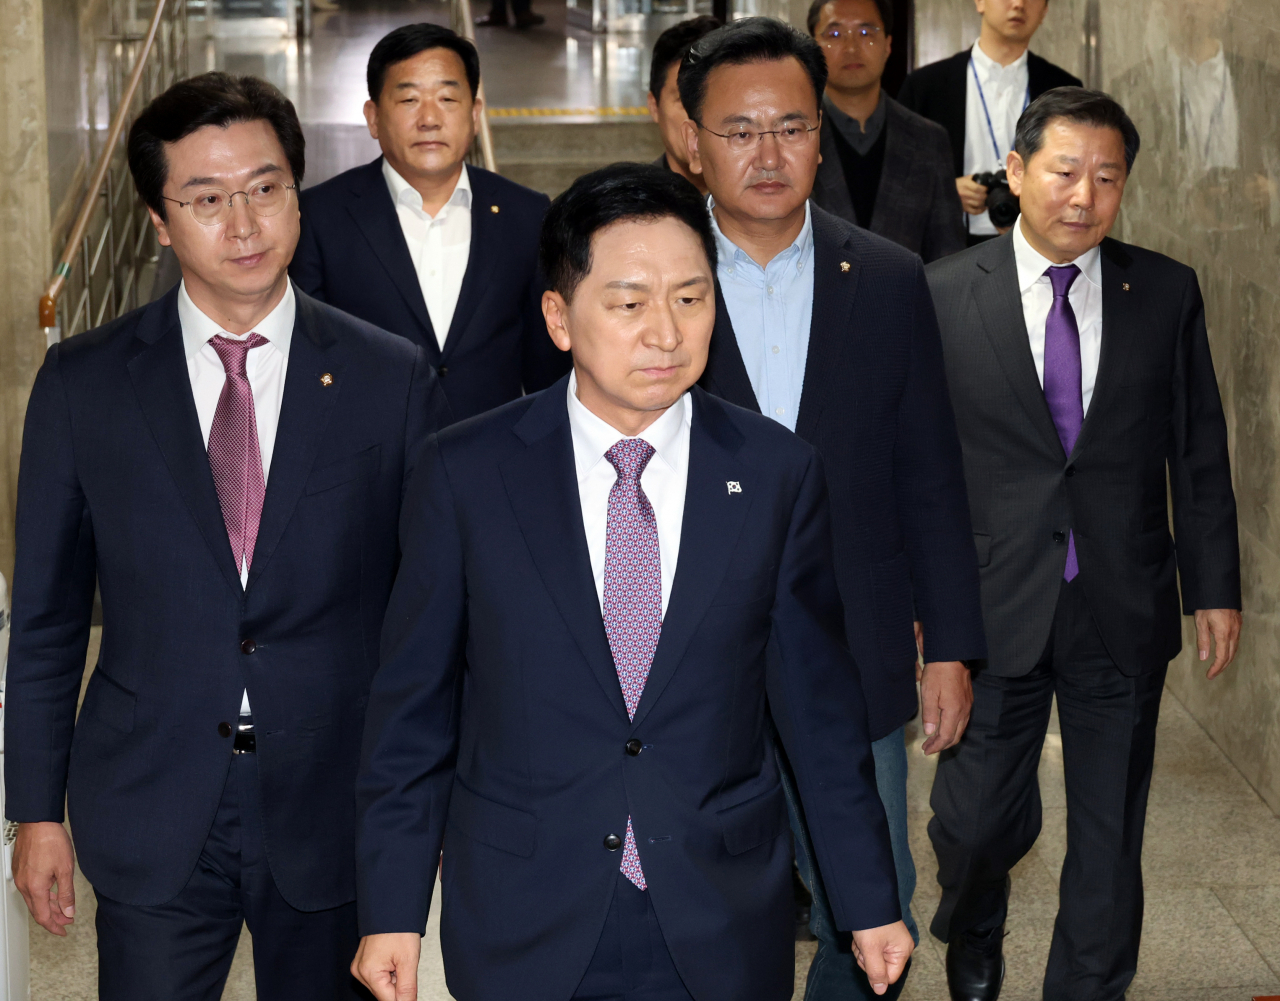 People Power Party Chairman Kim Gi-hyeon (center, front row) and high-ranking party officials walk down the aisle at the National Assembly as the ruling party started an emergency meeting Sunday afternoon. (Yonhap)